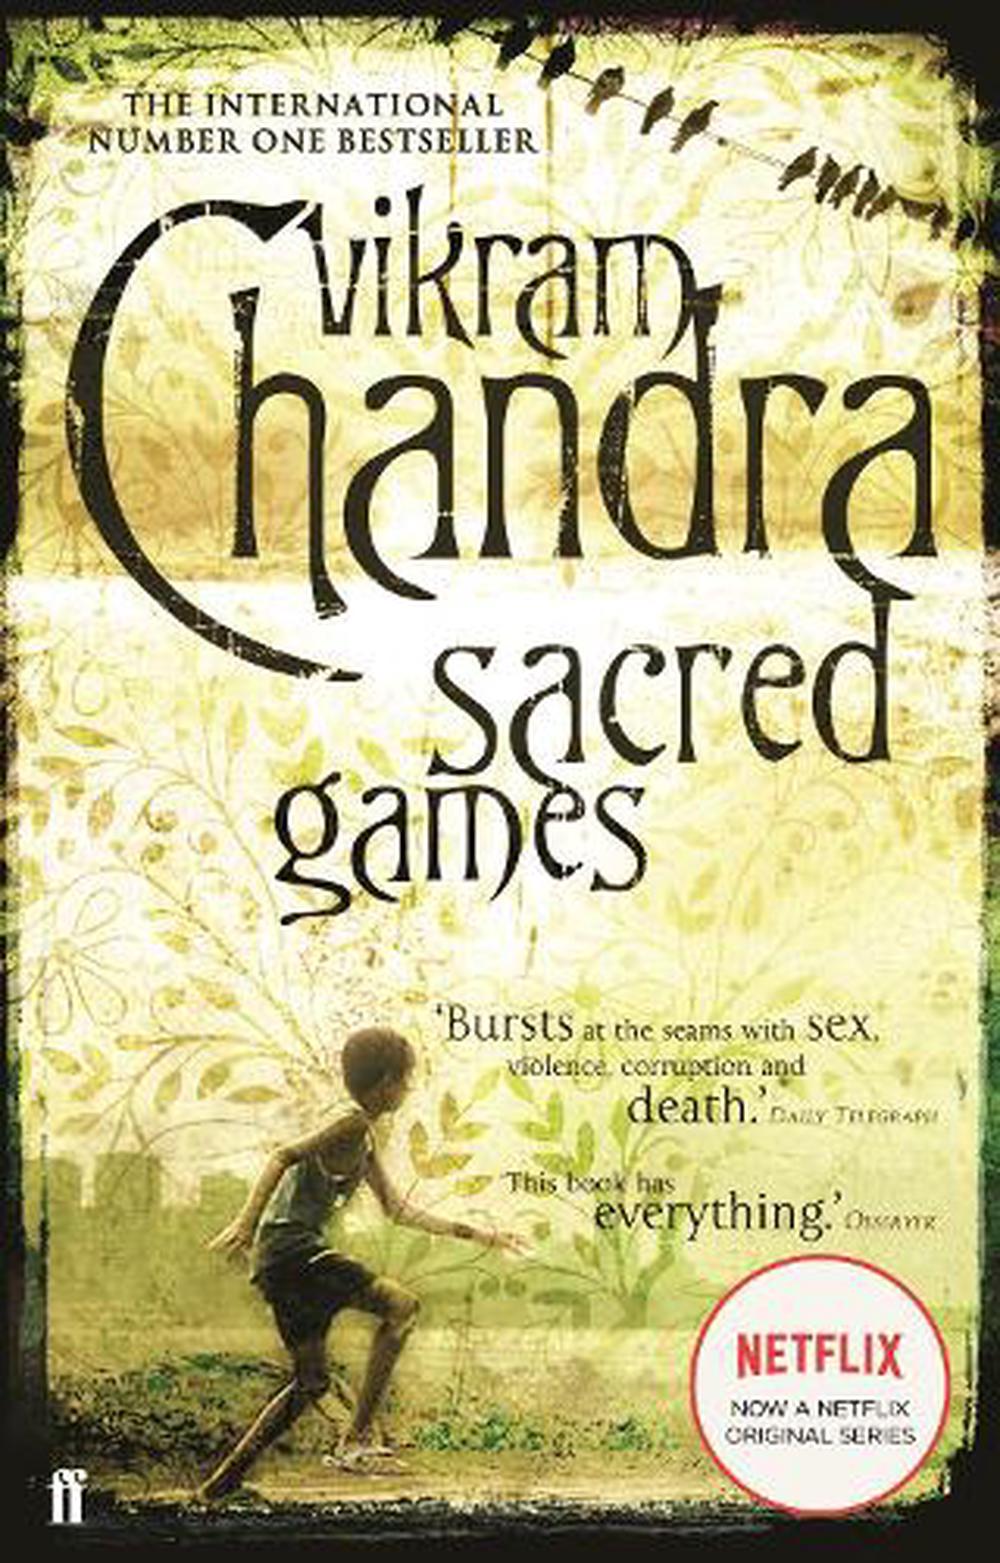 Sacred Games by Vikram Chandra (English) Paperback Book Free Shipping